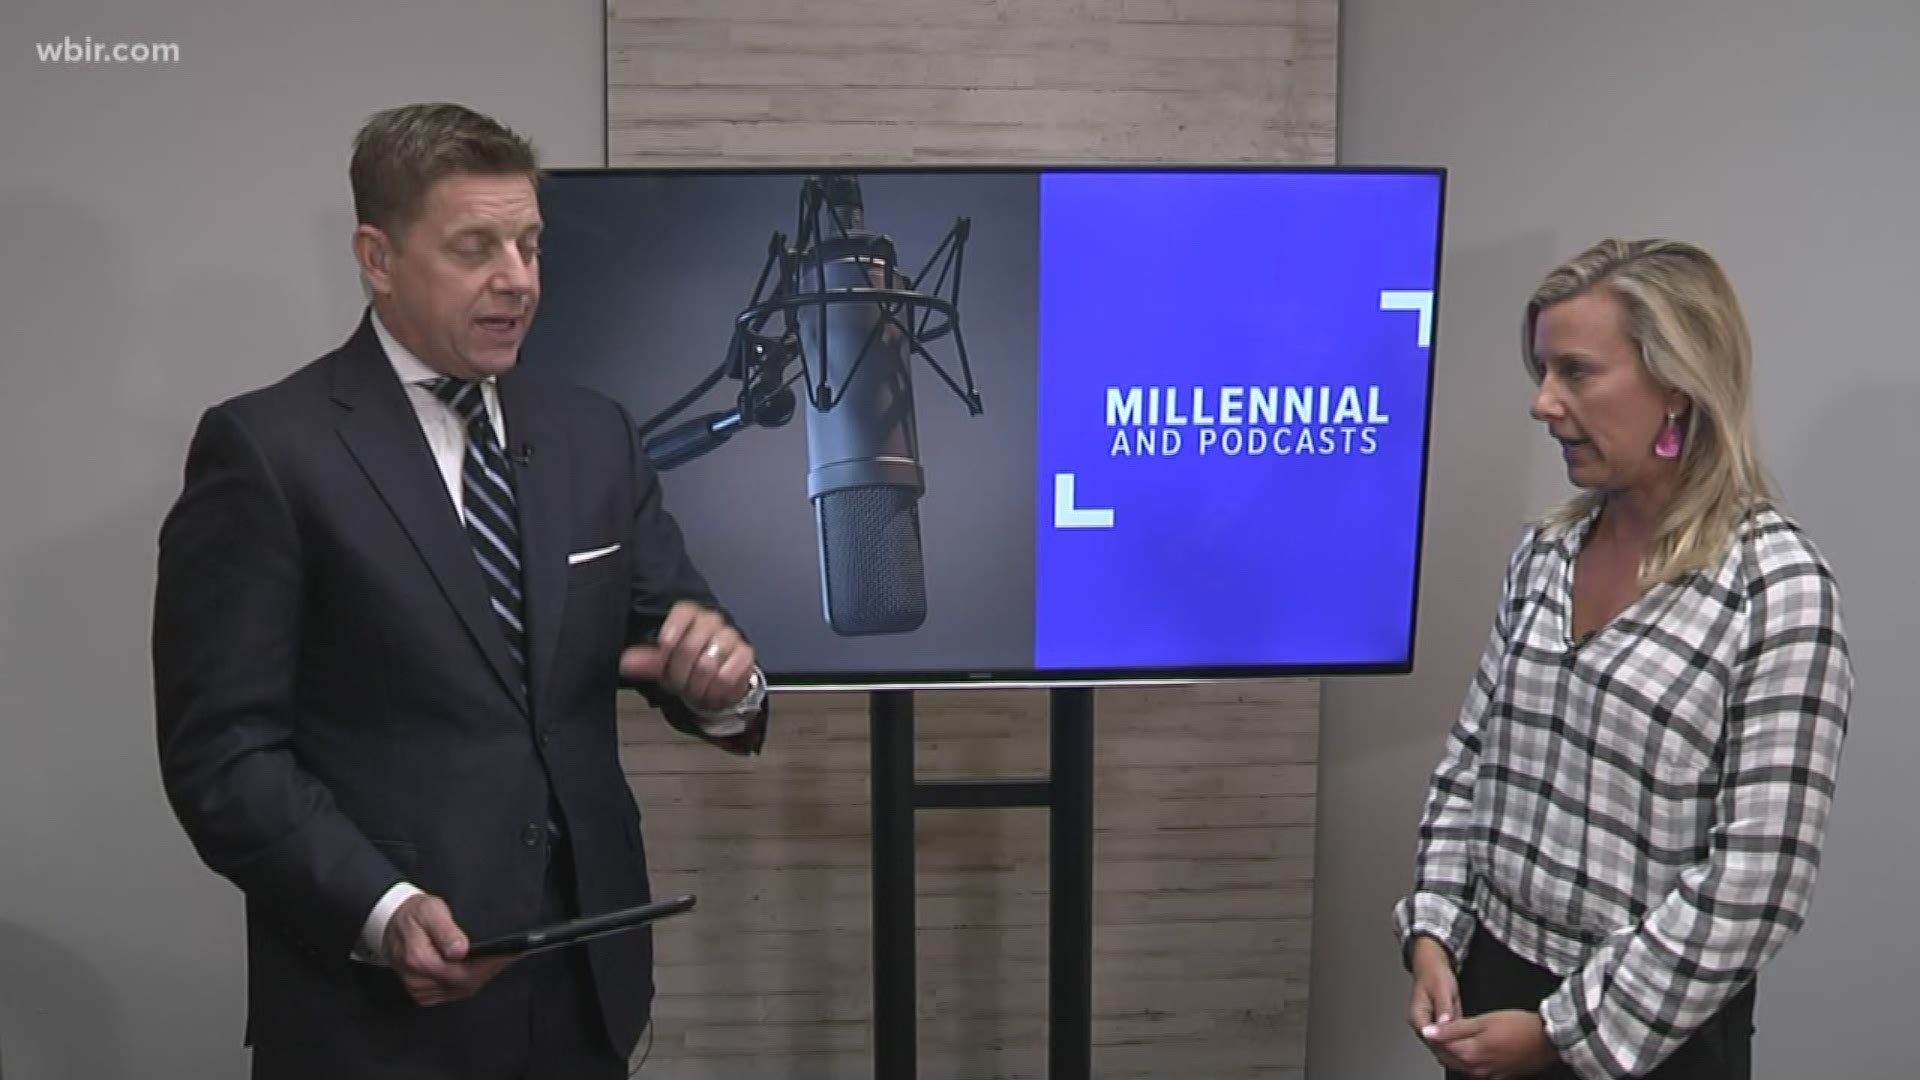 Erin Freeman from Ackermann Marketing explains how millennials played a critical roll in the growth of podcasts.